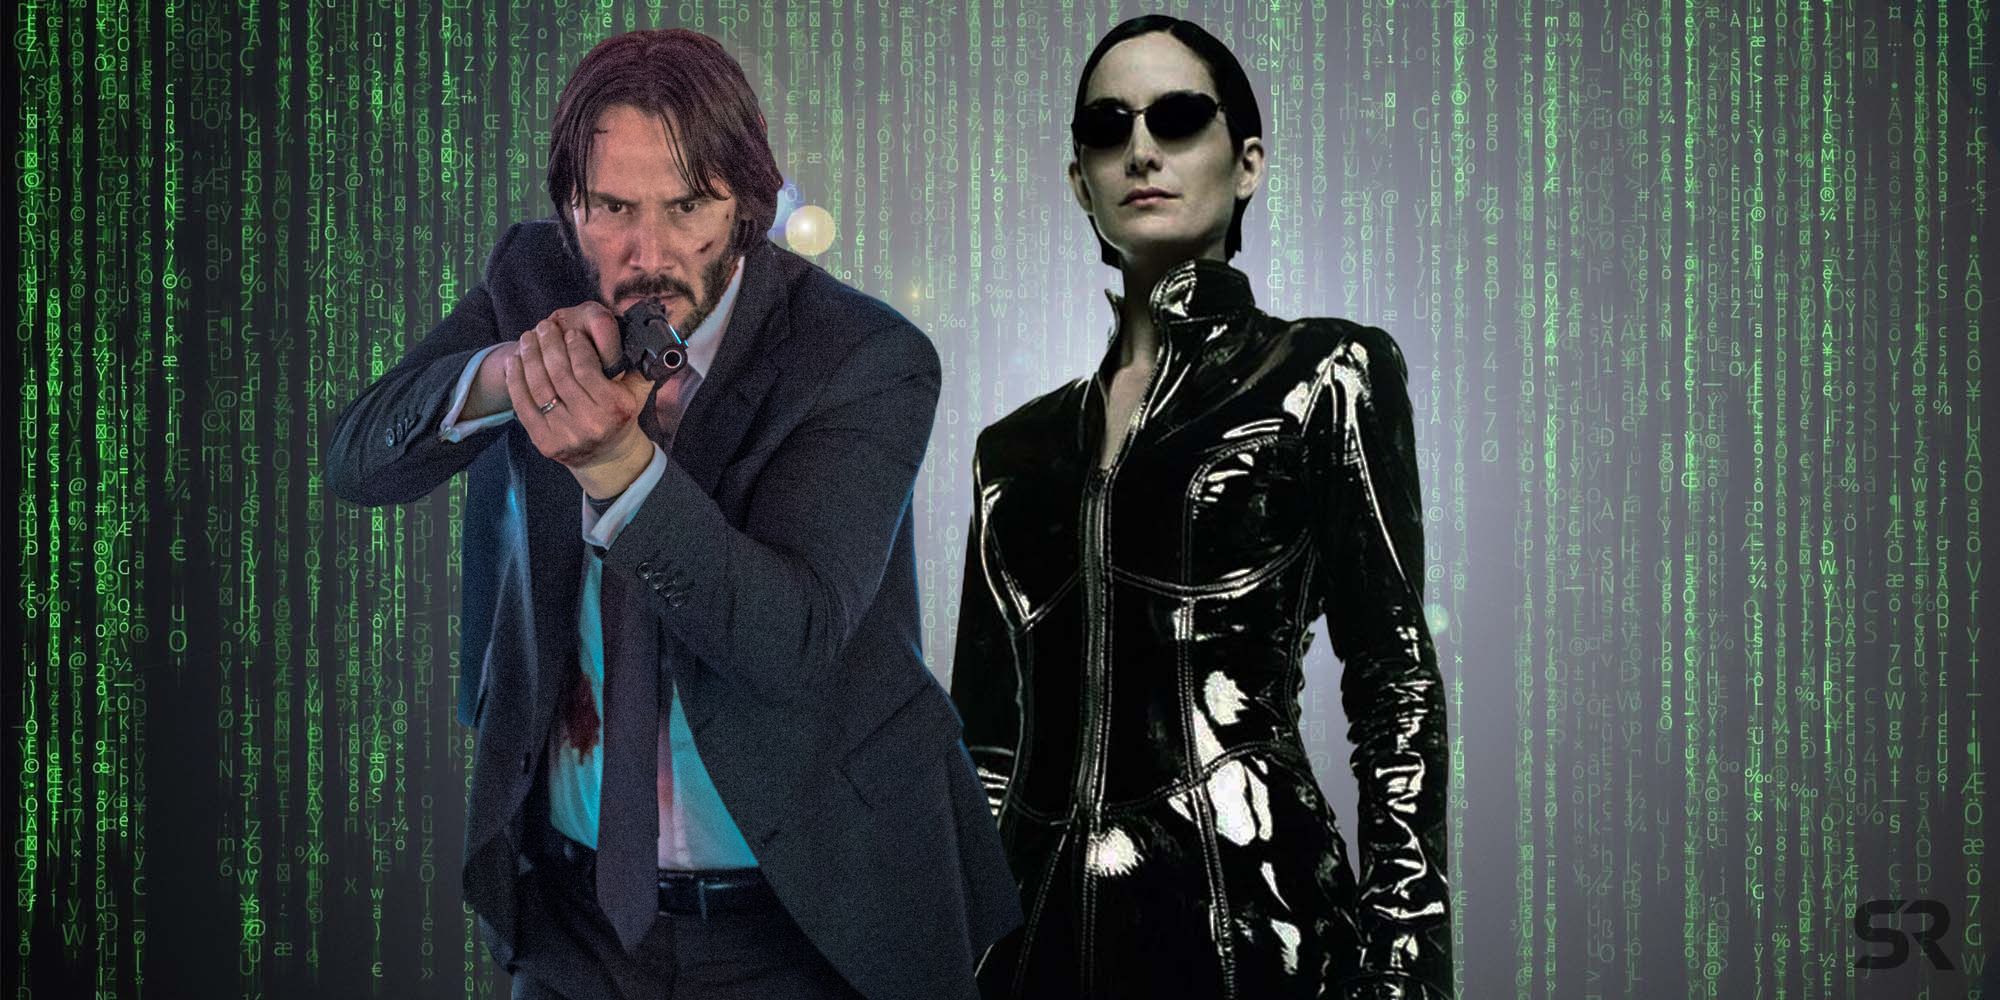 Keanu Reeves and Carrie-Anne Moss Mashup